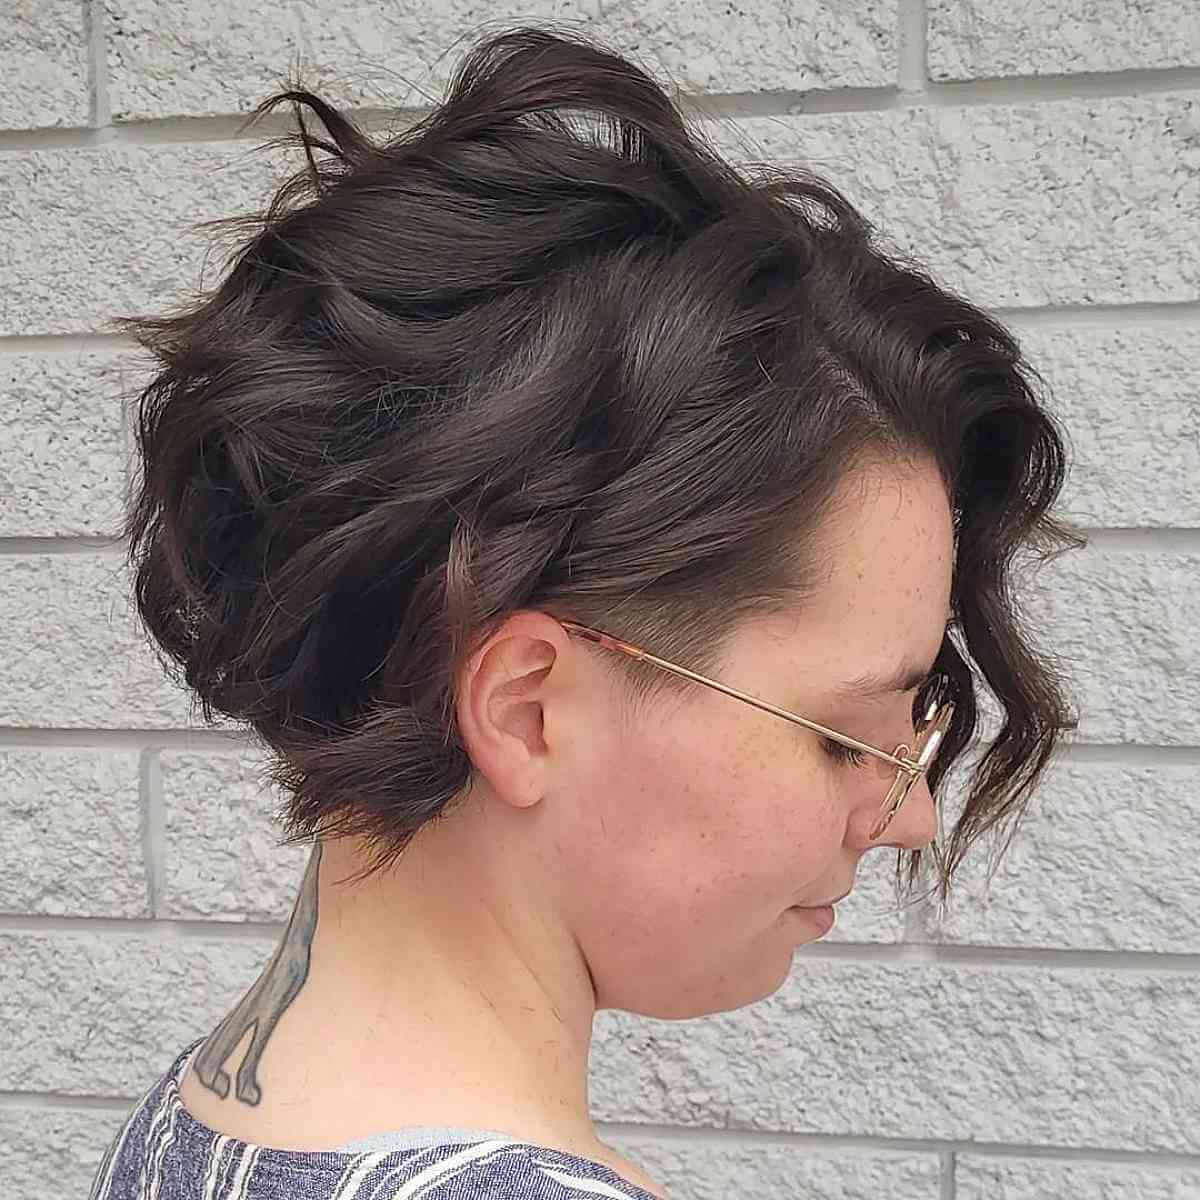 Above the Shoulders Short-Length Curled Bob with an Undercut